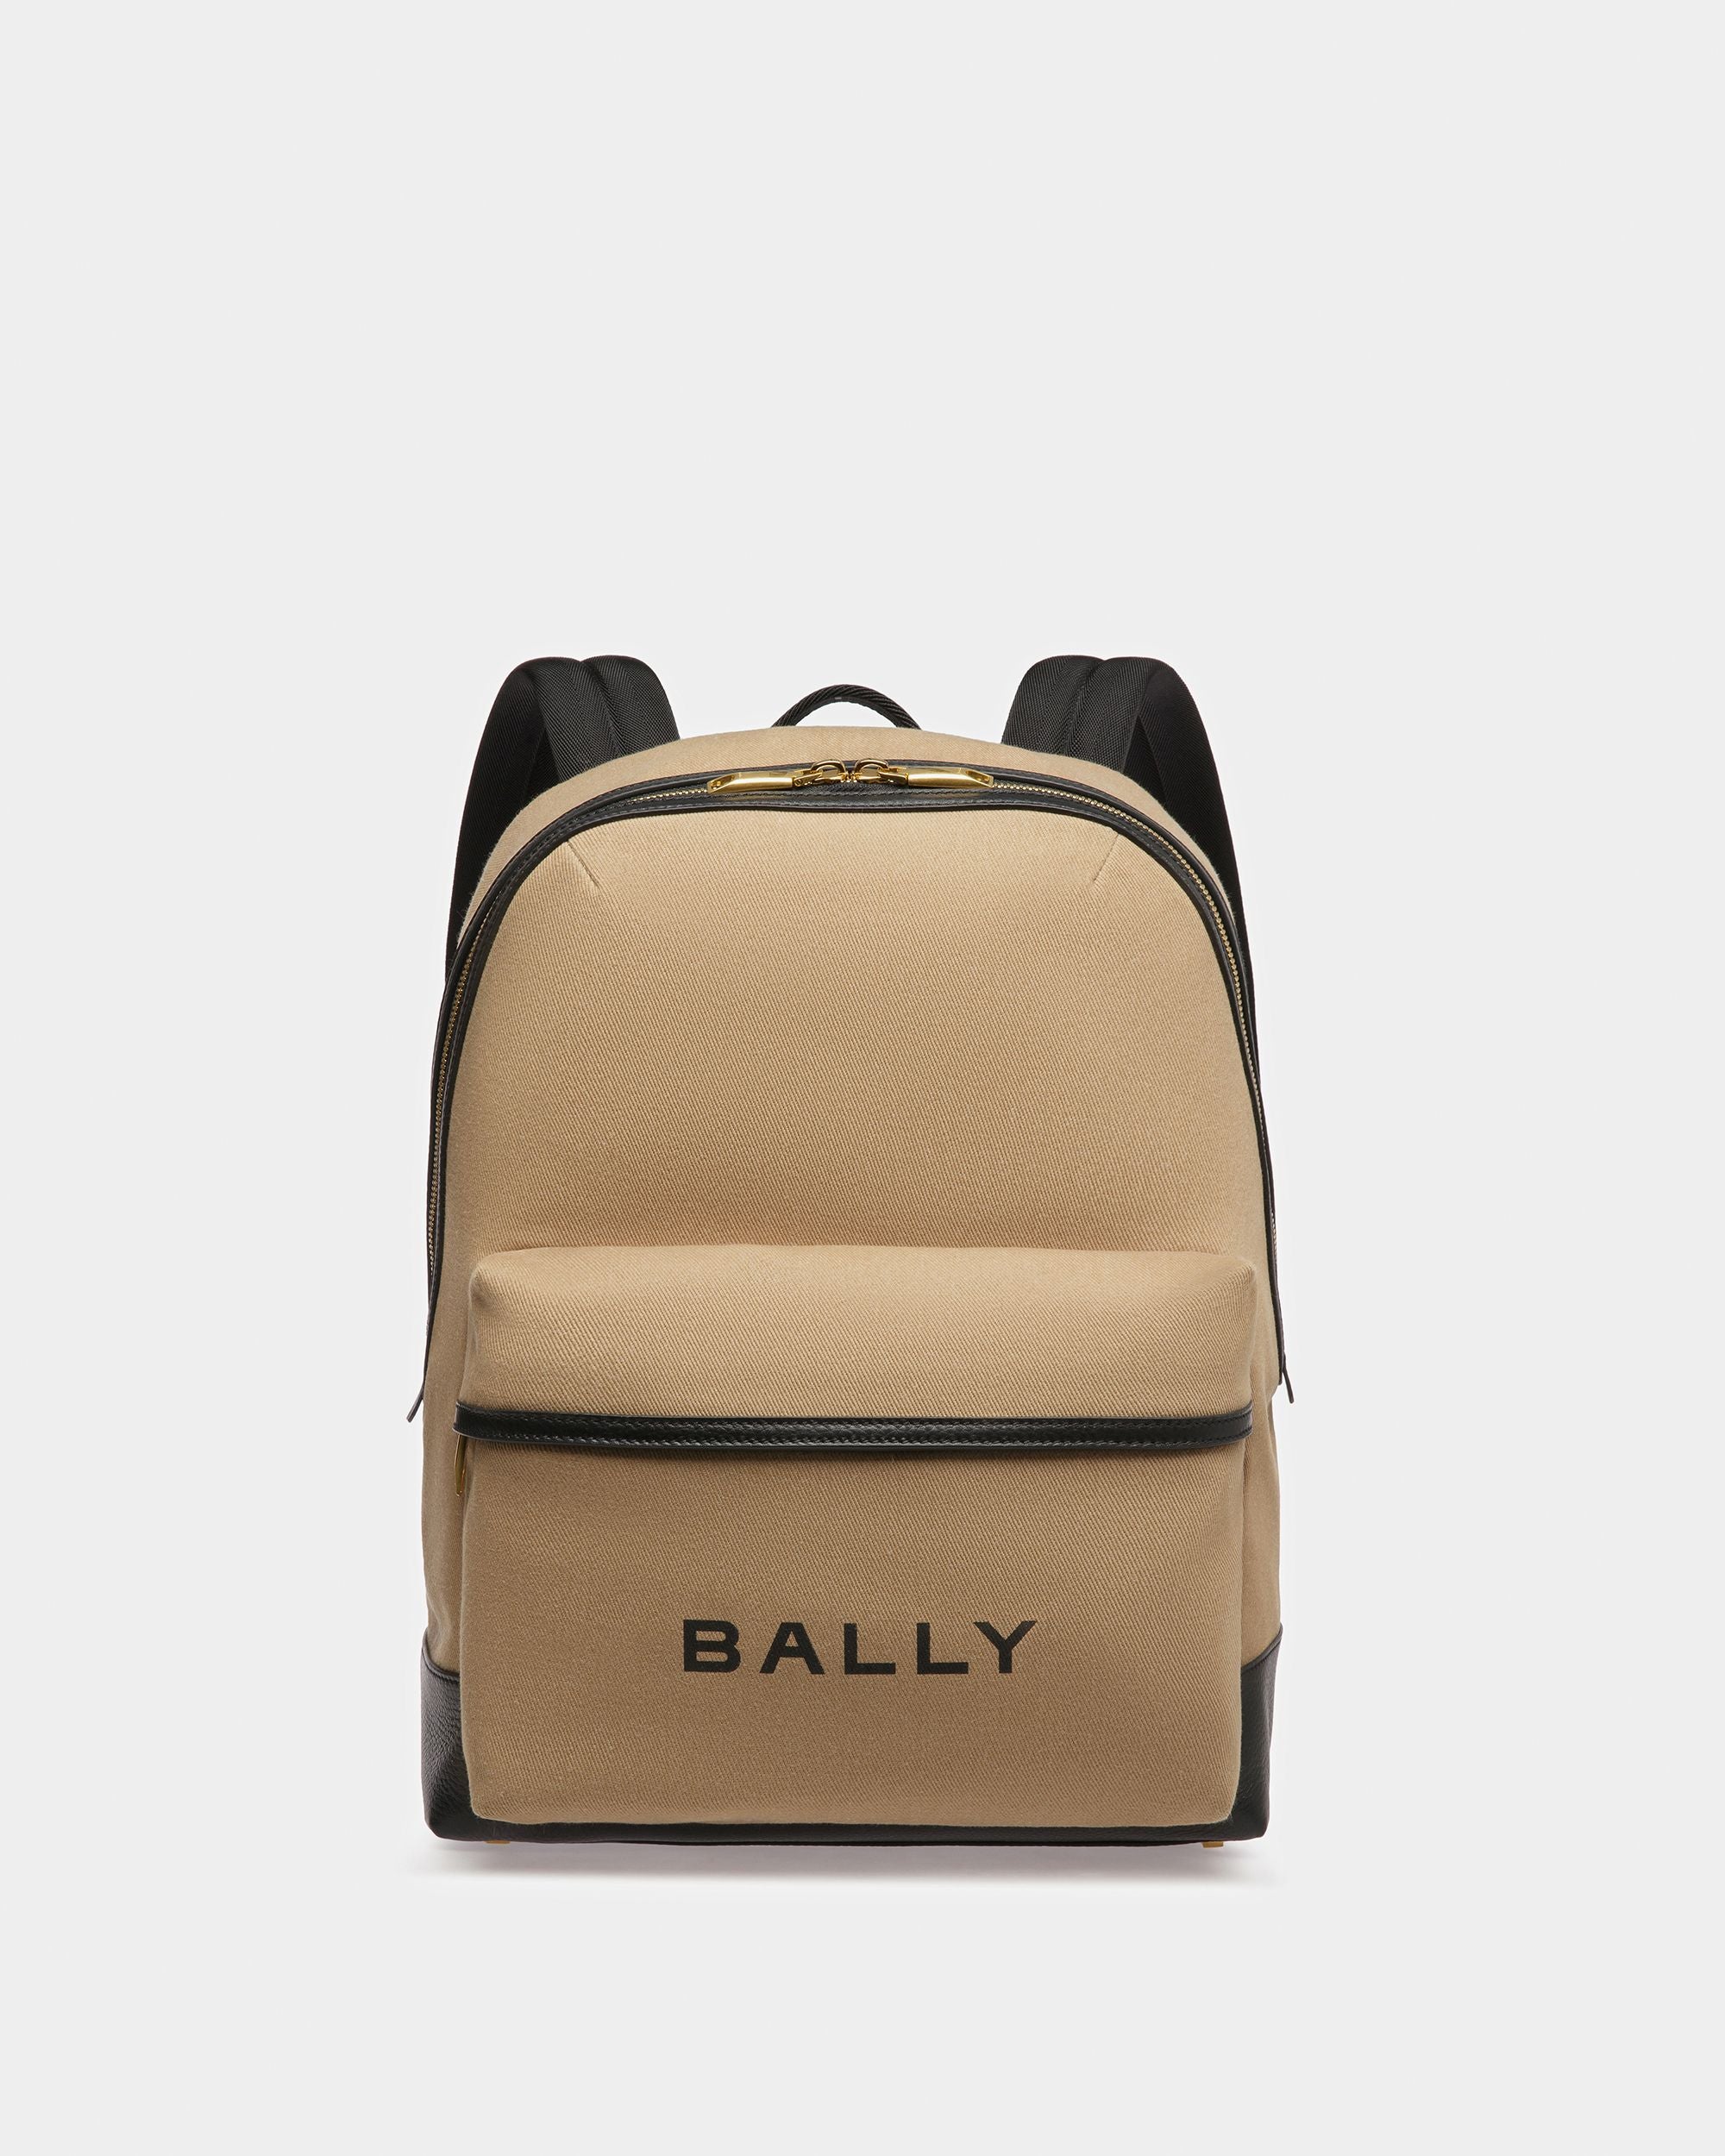 Treck | Men's Backpack | Sand And Black Fabric And Leather | Bally | Still Life Front